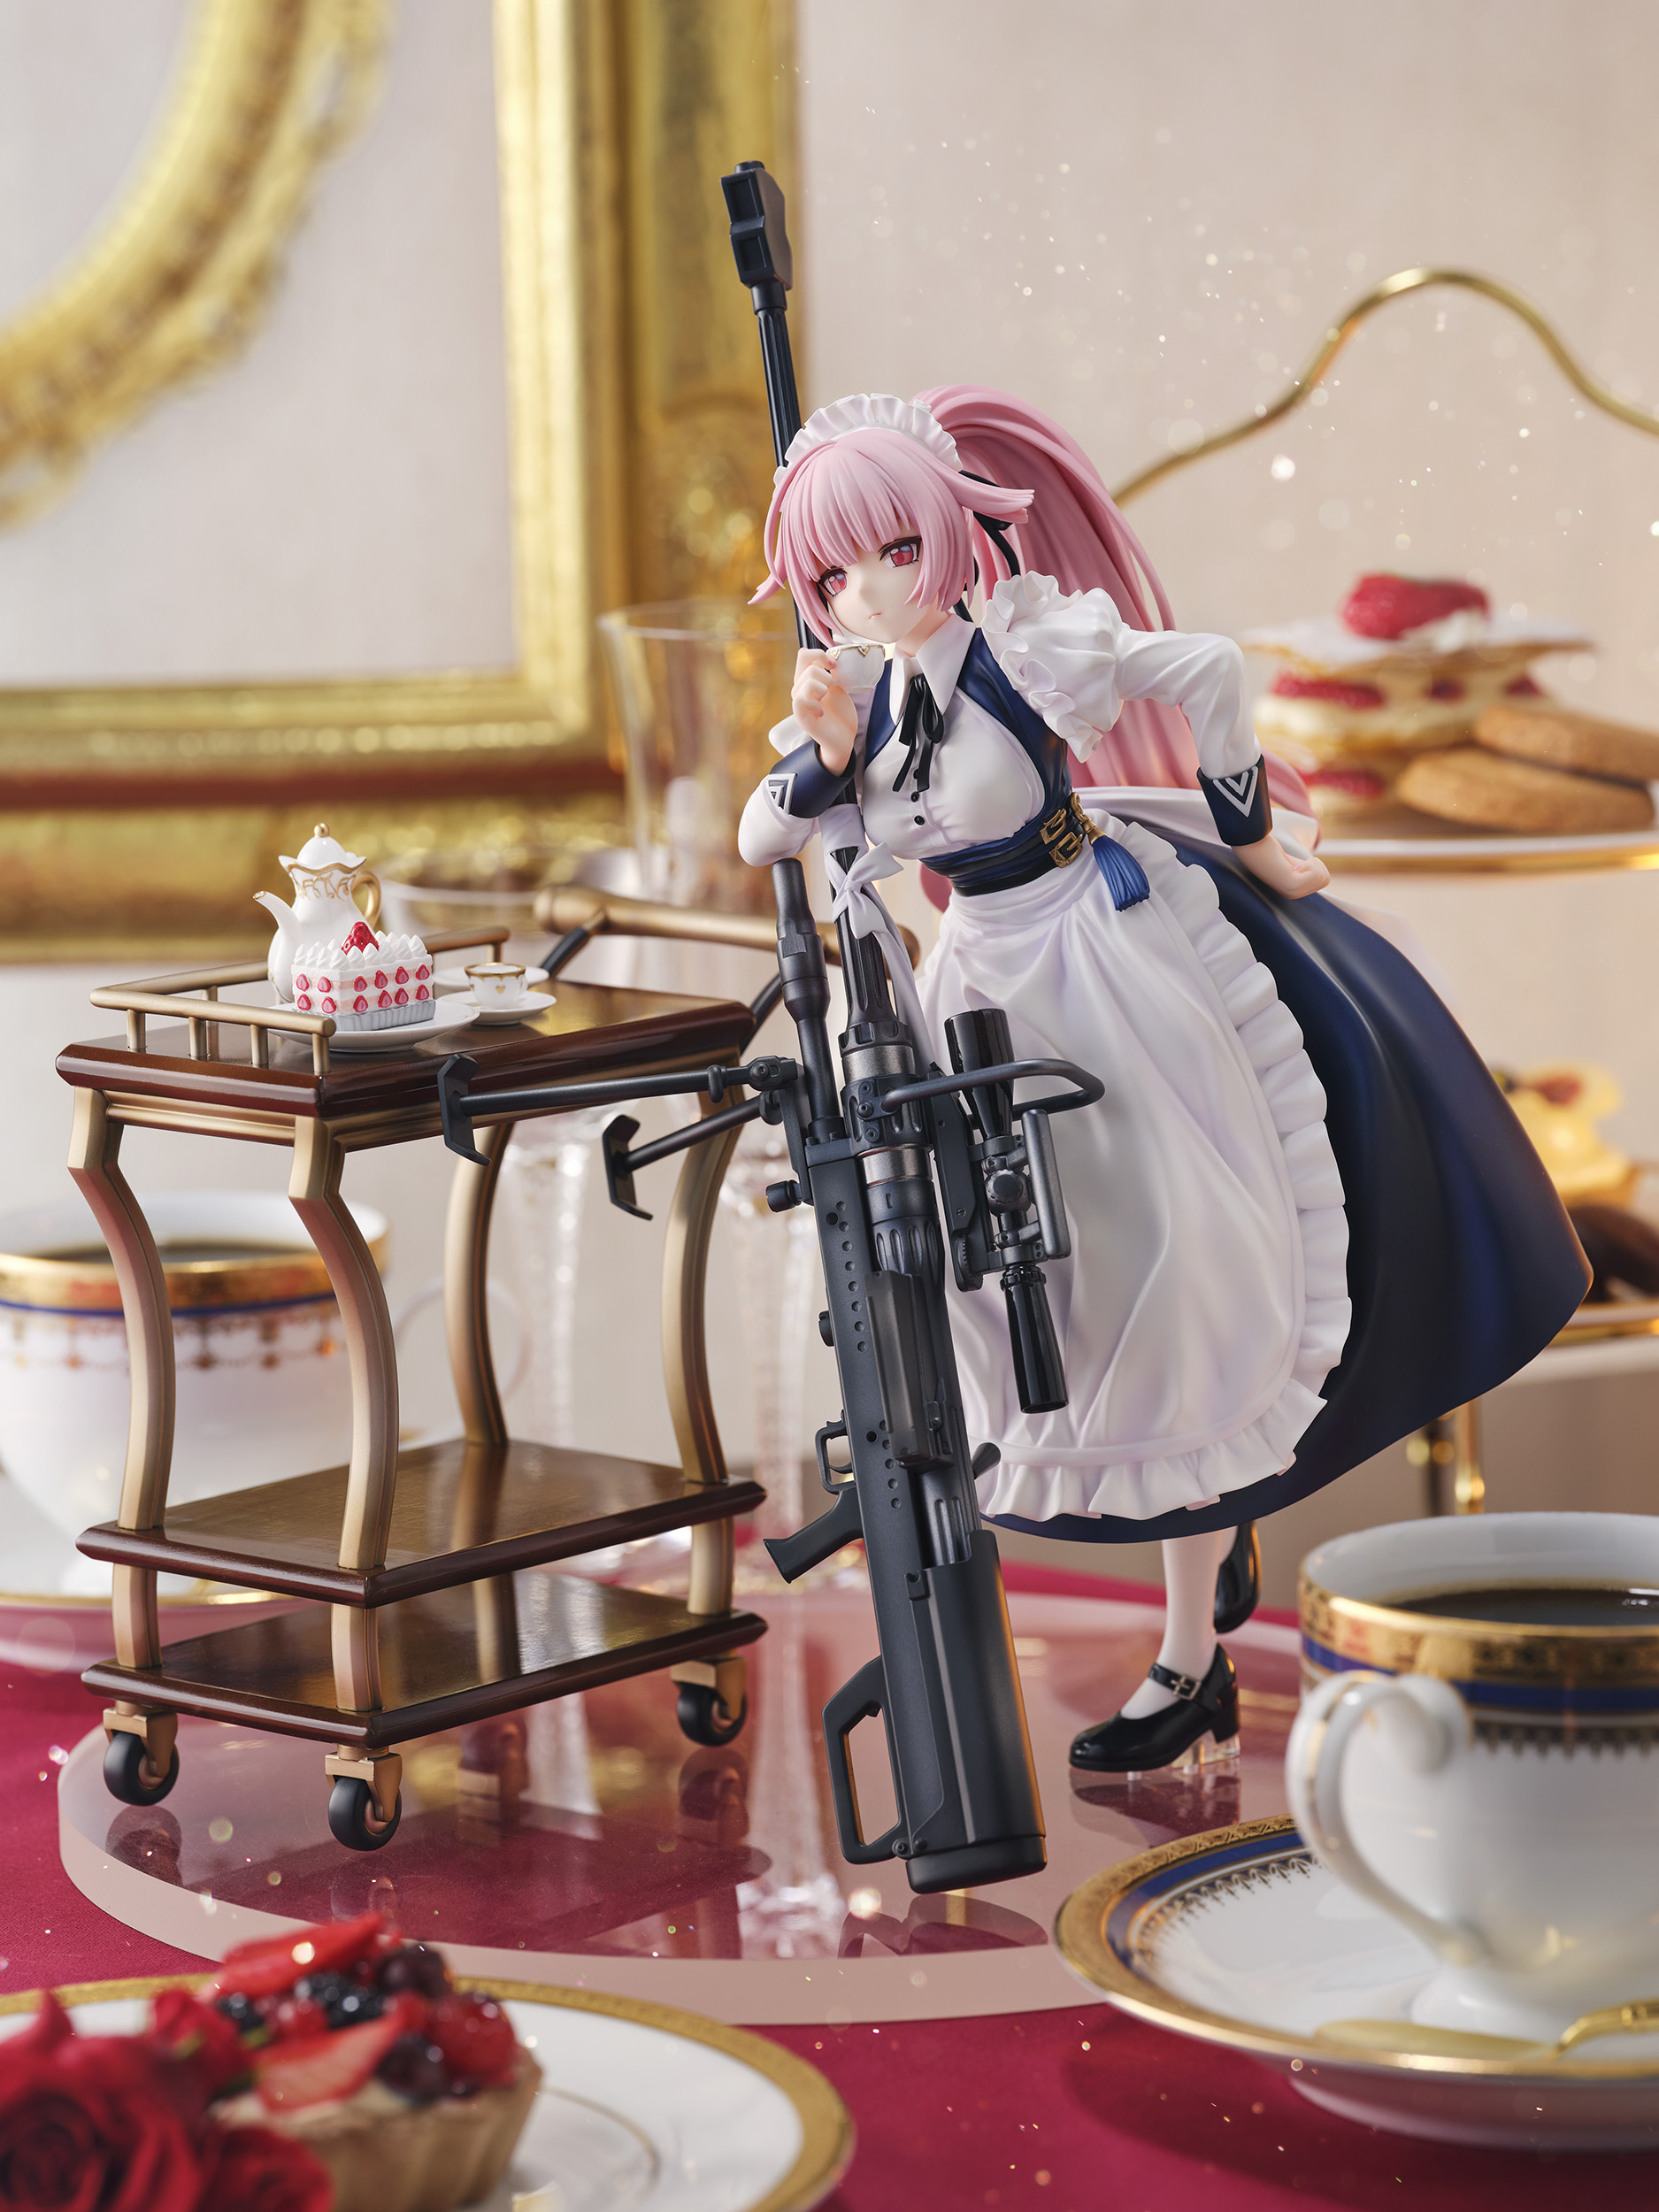 International Smash Hit Mobile Game “Girls’Frontline“ NTW-20 Aristocrat Experience is Coming Soon as a 1/6 Scale Figure!